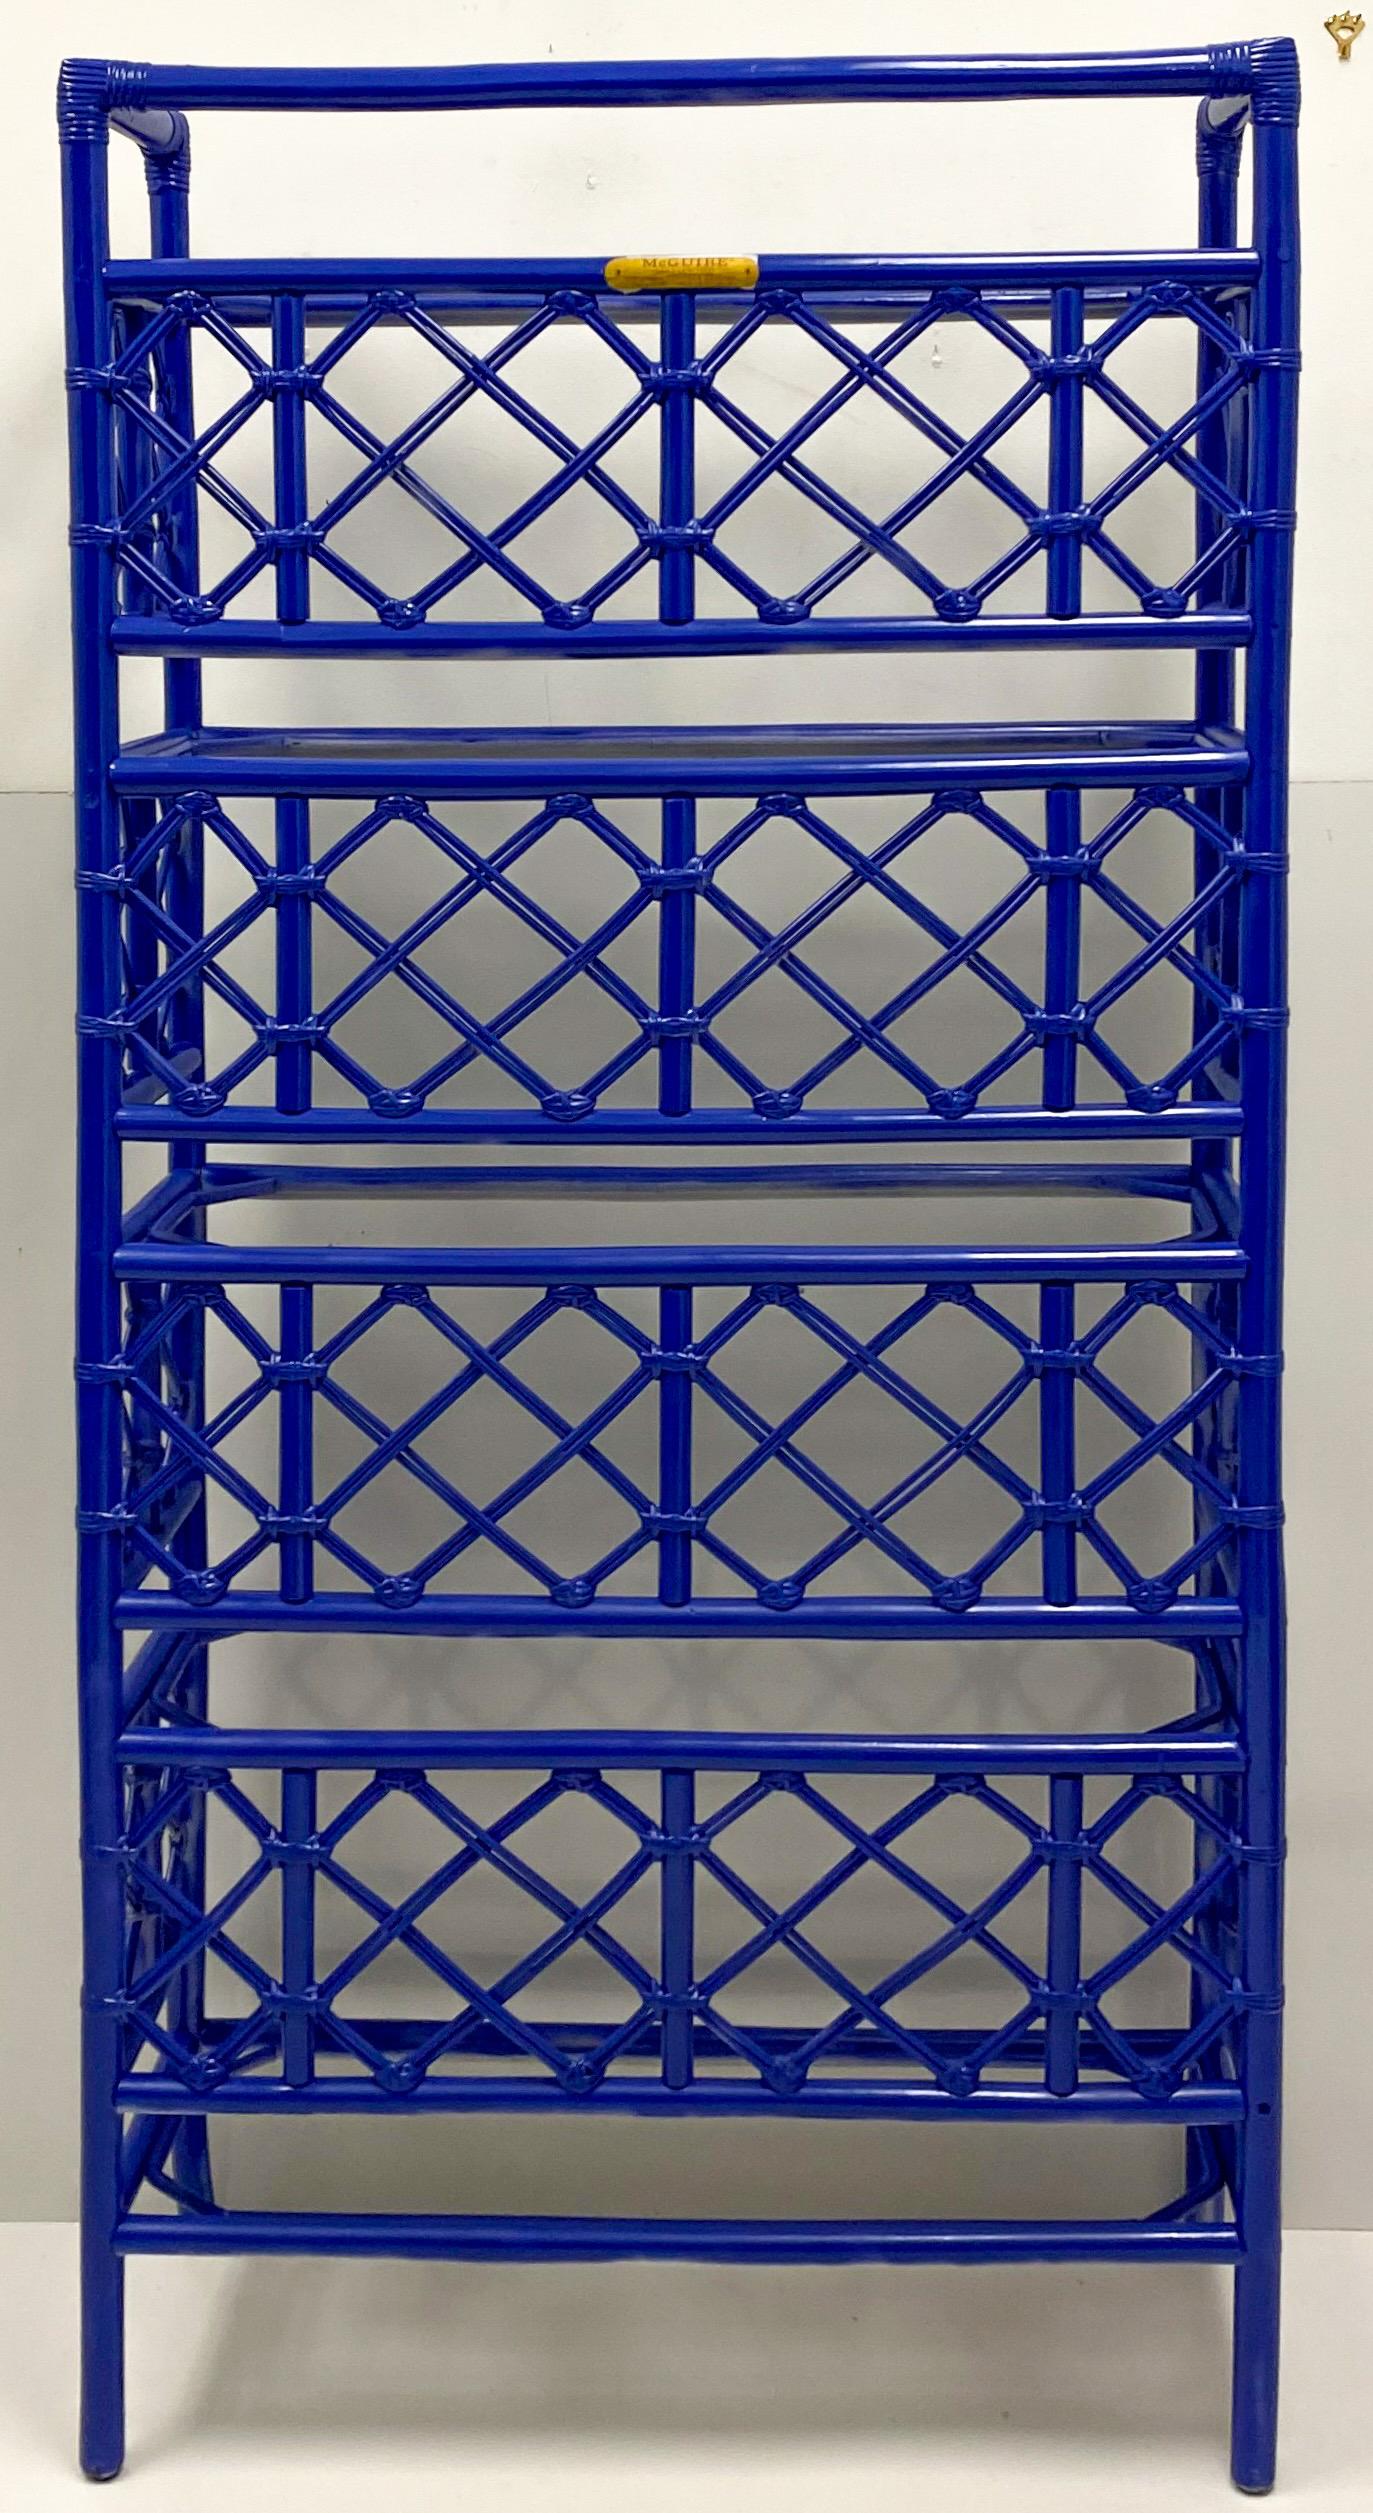 American 1960s Chippendale Style Blue Painted Rattan Shelf / Etagere by McGuire For Sale